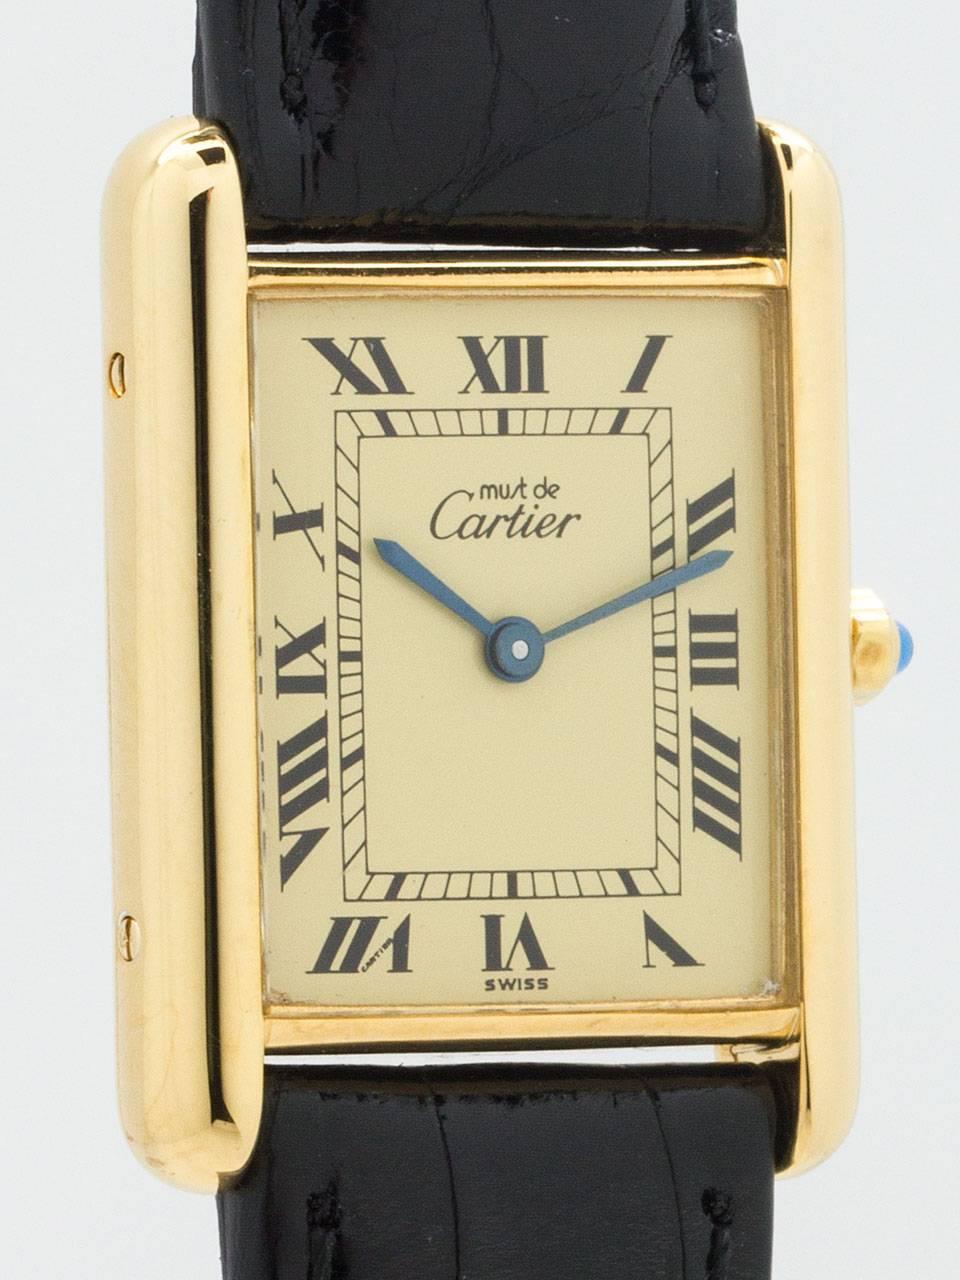 Cartier Man's Vermeil Tank Louis Must de Cartier, circa 2000s. Vermeil, 20 microns gold over silver, 26 x 31mm case secured by four side screws and four back screws. Classic cream color dial with black Roman figures, blued steel hands and signed